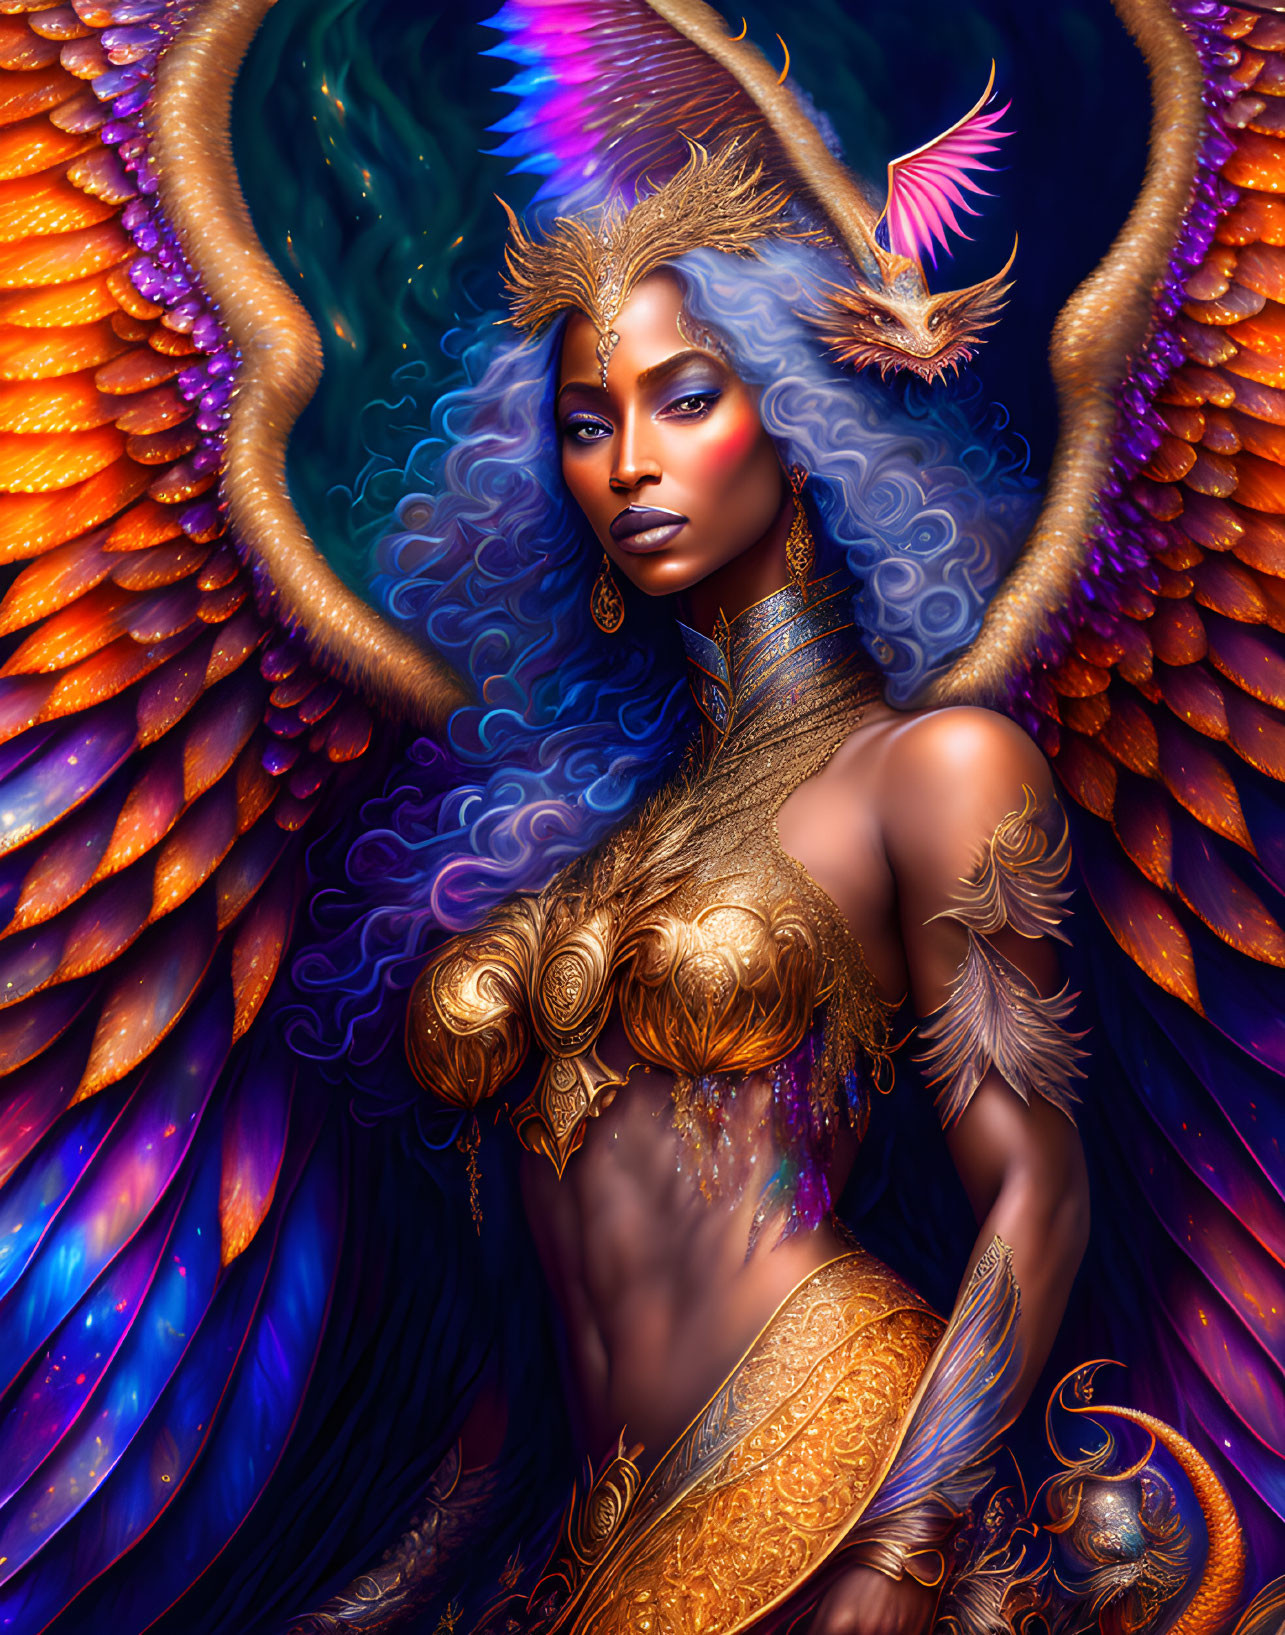 Fantasy illustration of woman with feathered crown and wings in gold armor